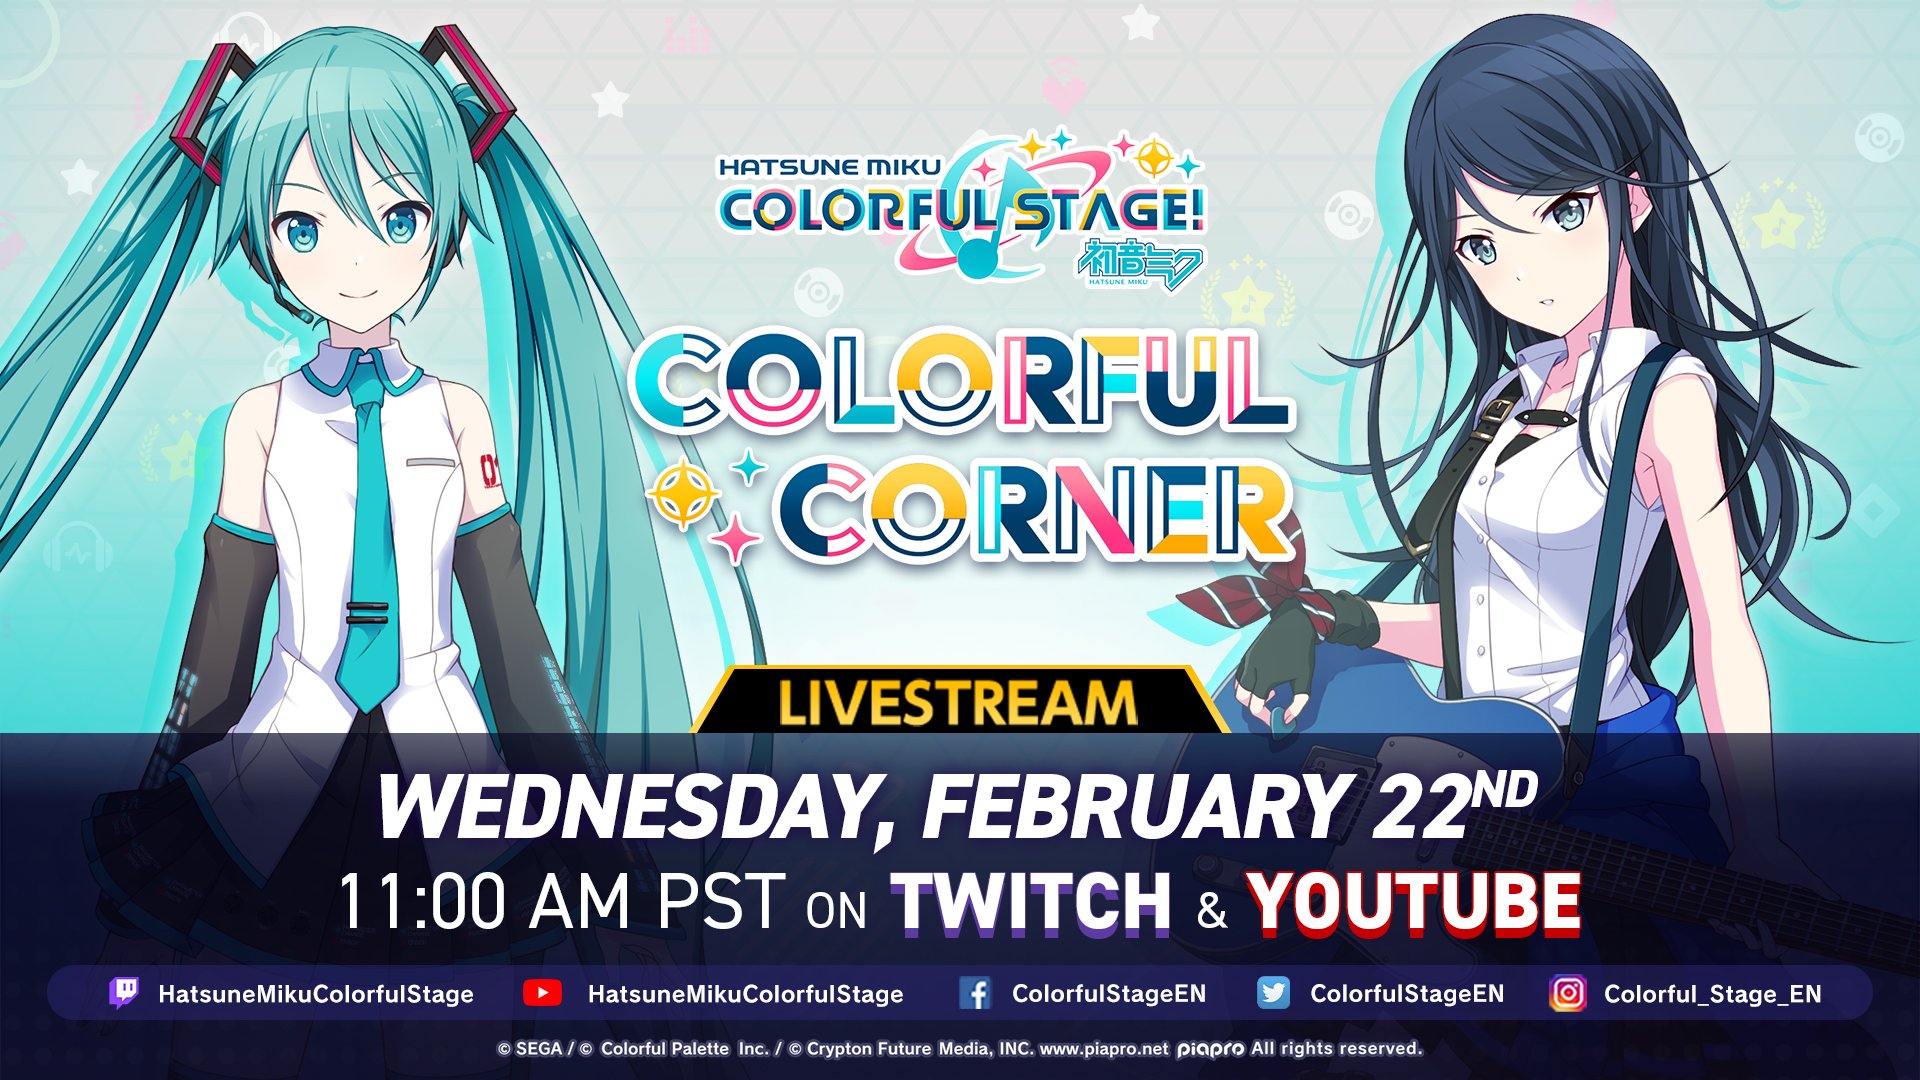 HATSUNE MIKU: COLORFUL STAGE! on Twitter: 